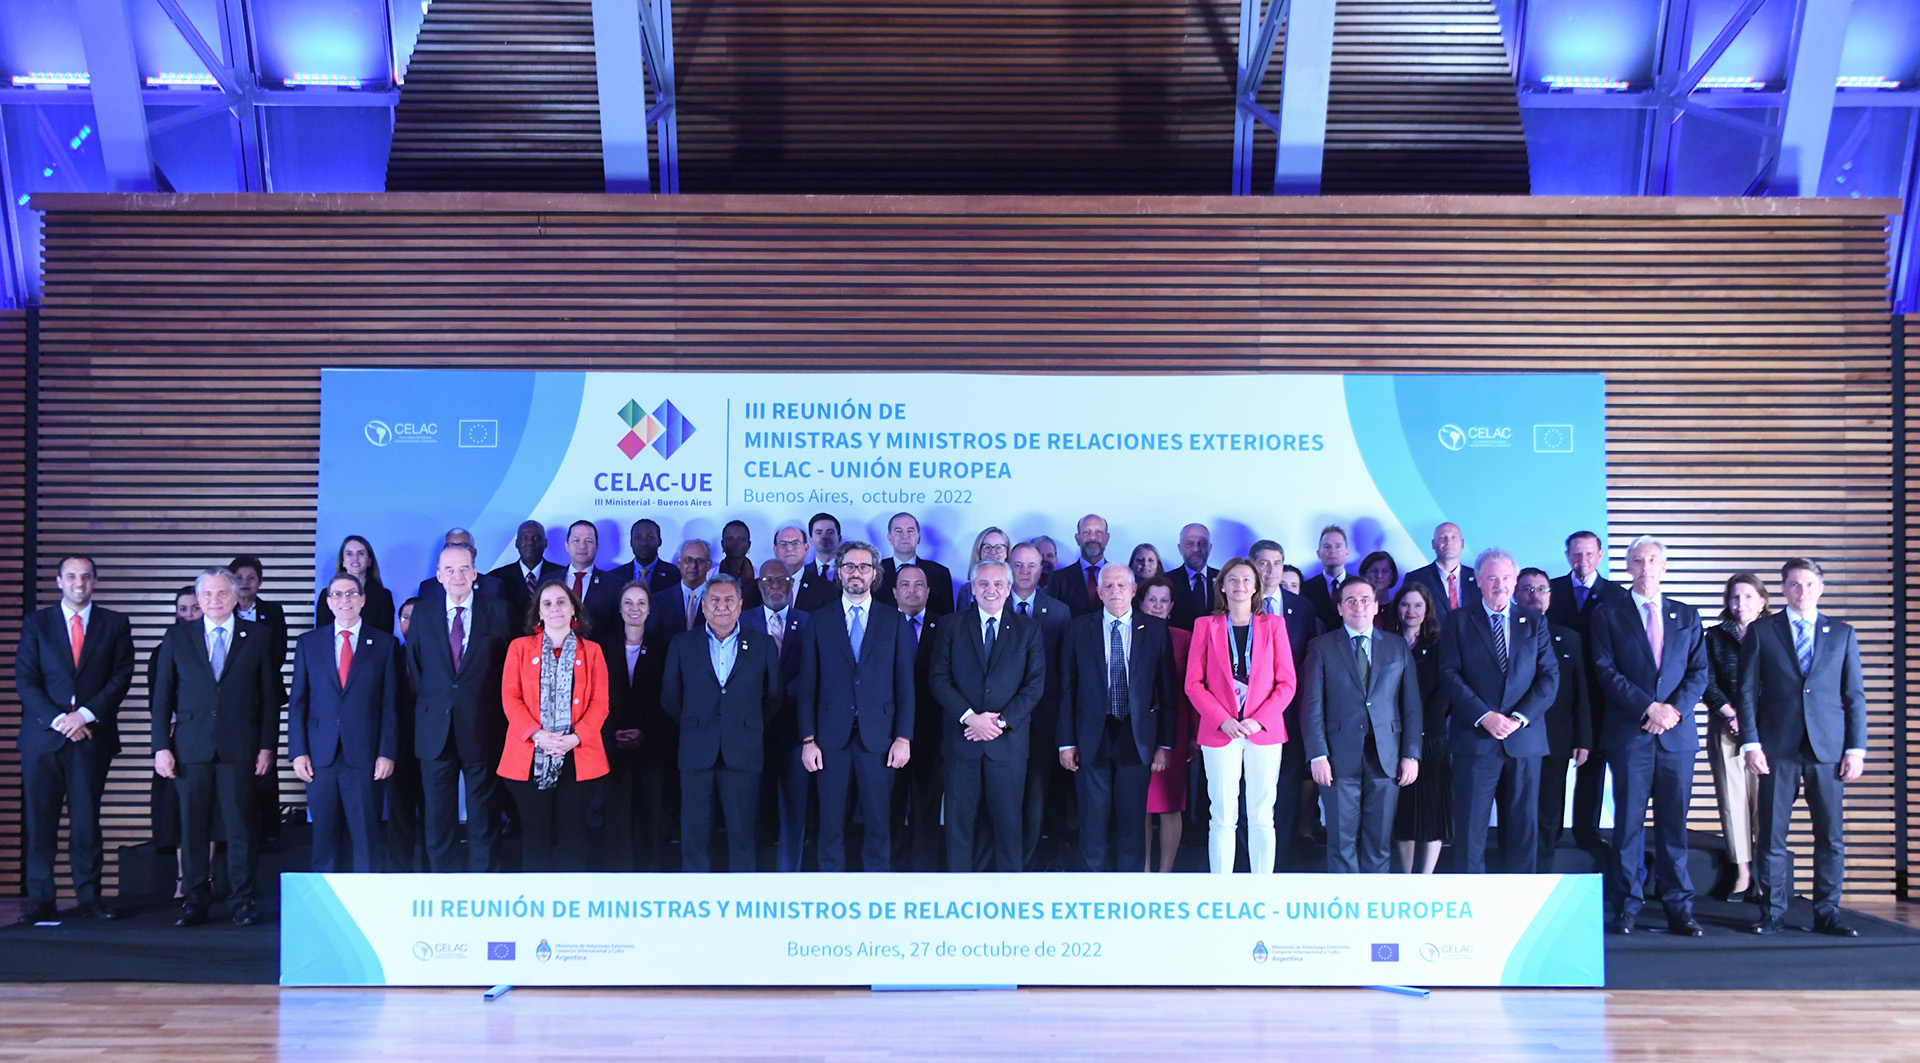 Family photo at CCK on Wednesday evening.  In the middle, Minister of Foreign Affairs Santiago Cafiero, President Alberto Fernández and High European Representative Josef Borrell with representatives of 53 other countries.  